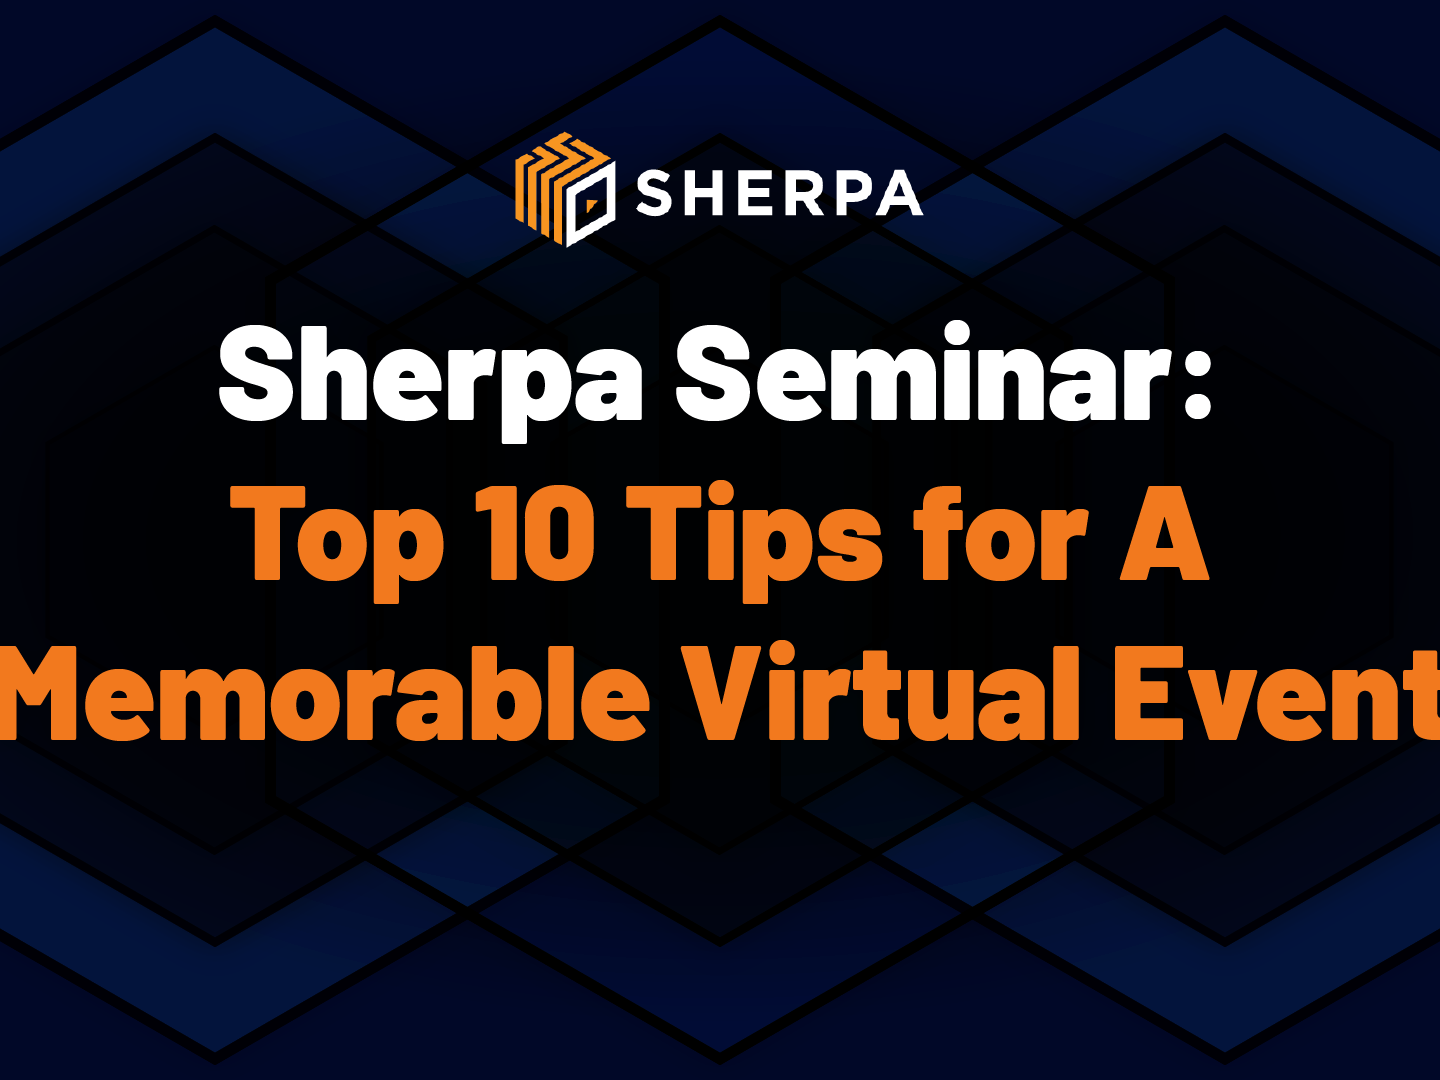 Top 10 Tips for A Memorable Virtual Event